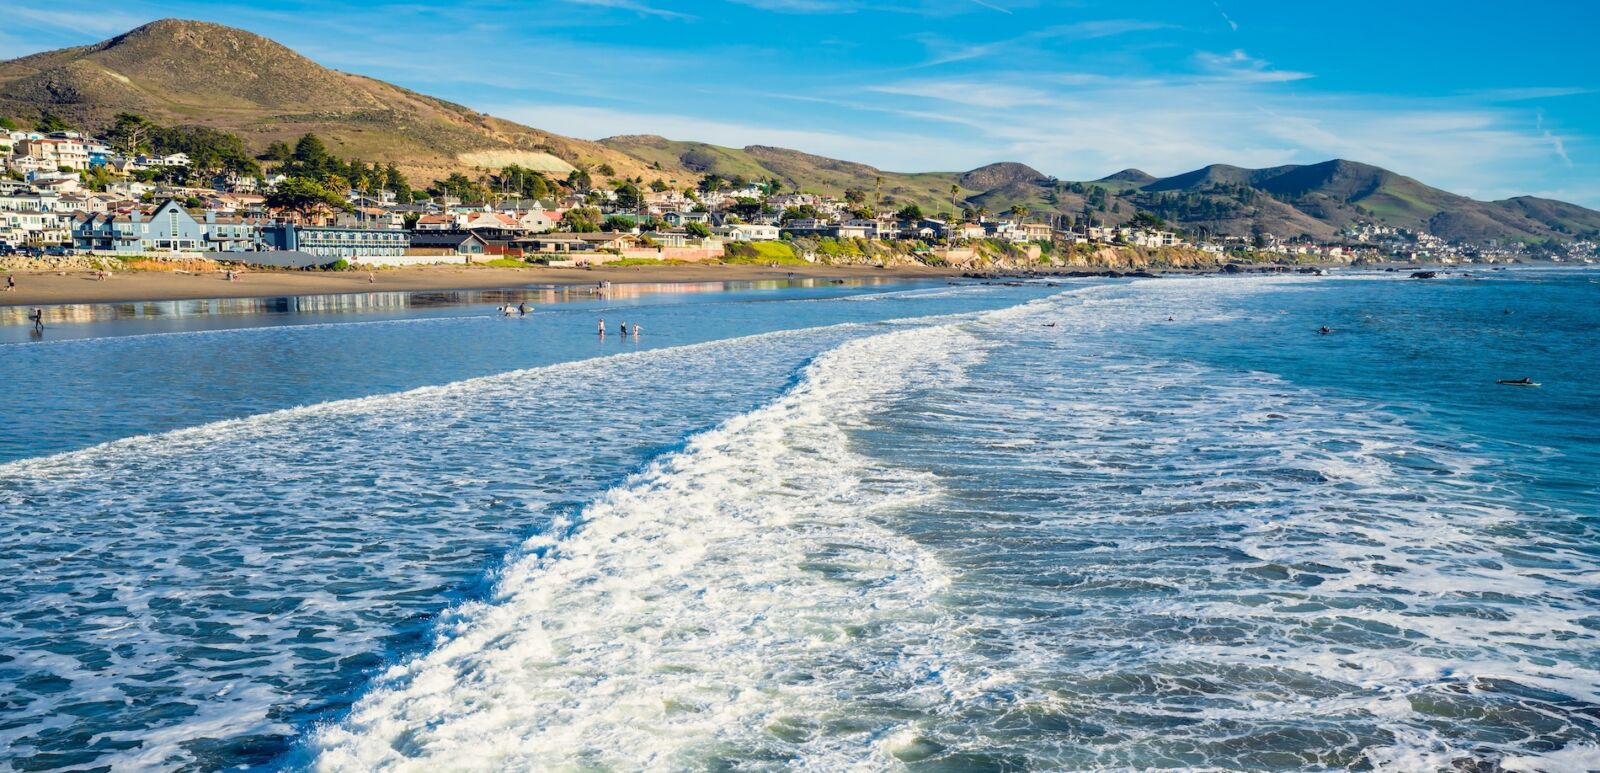 Cayucos State Beach is right on the waterfront in the town of Cayucos, Central Coast of California. Photo via Shutterstock.